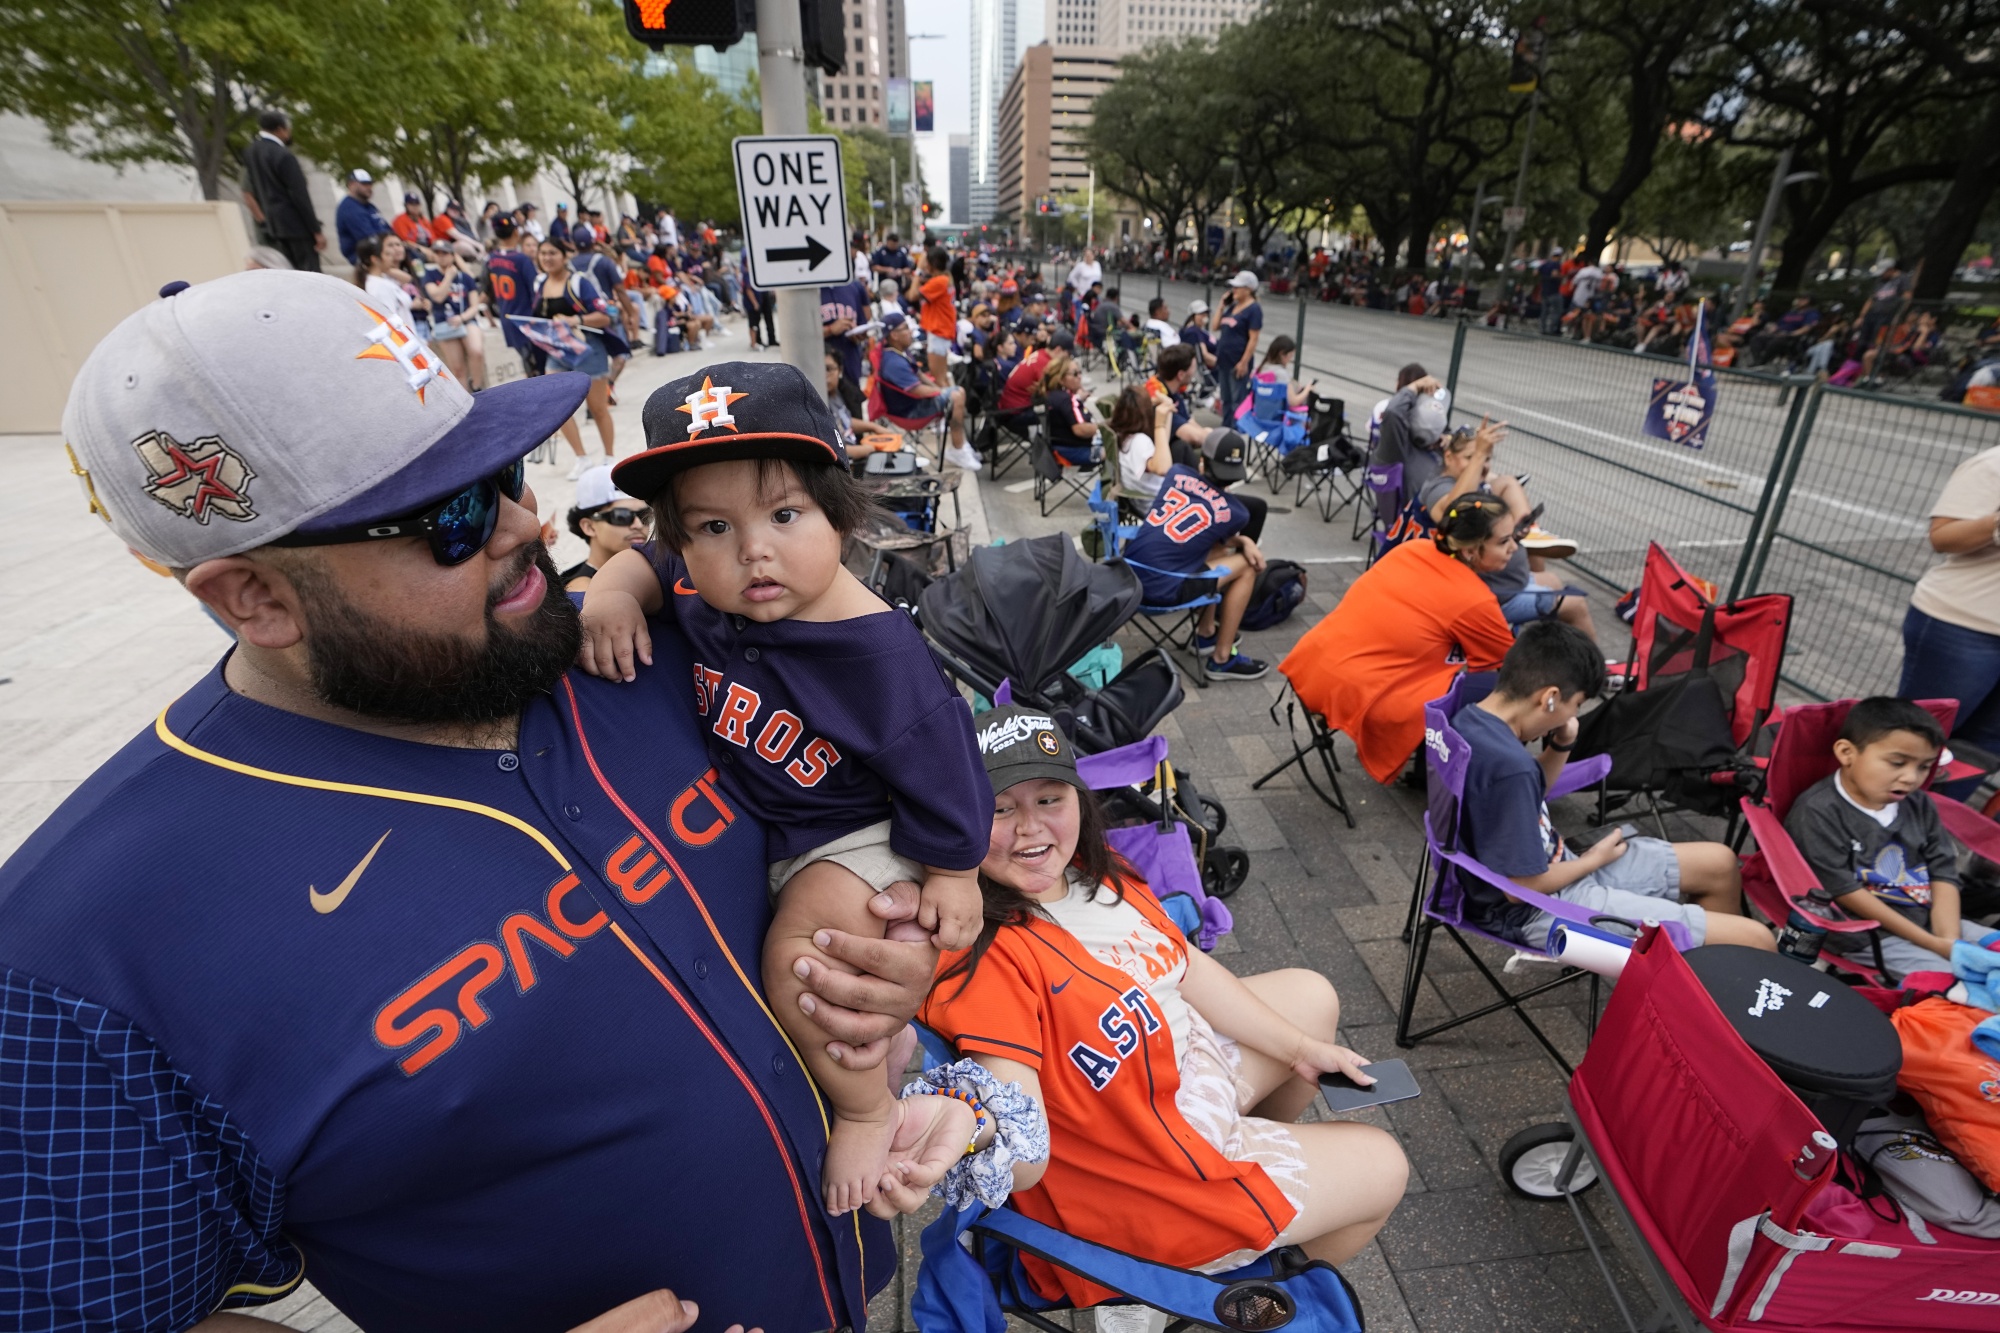 Astros parade: Houston schools canceled Monday in hopes families will attend